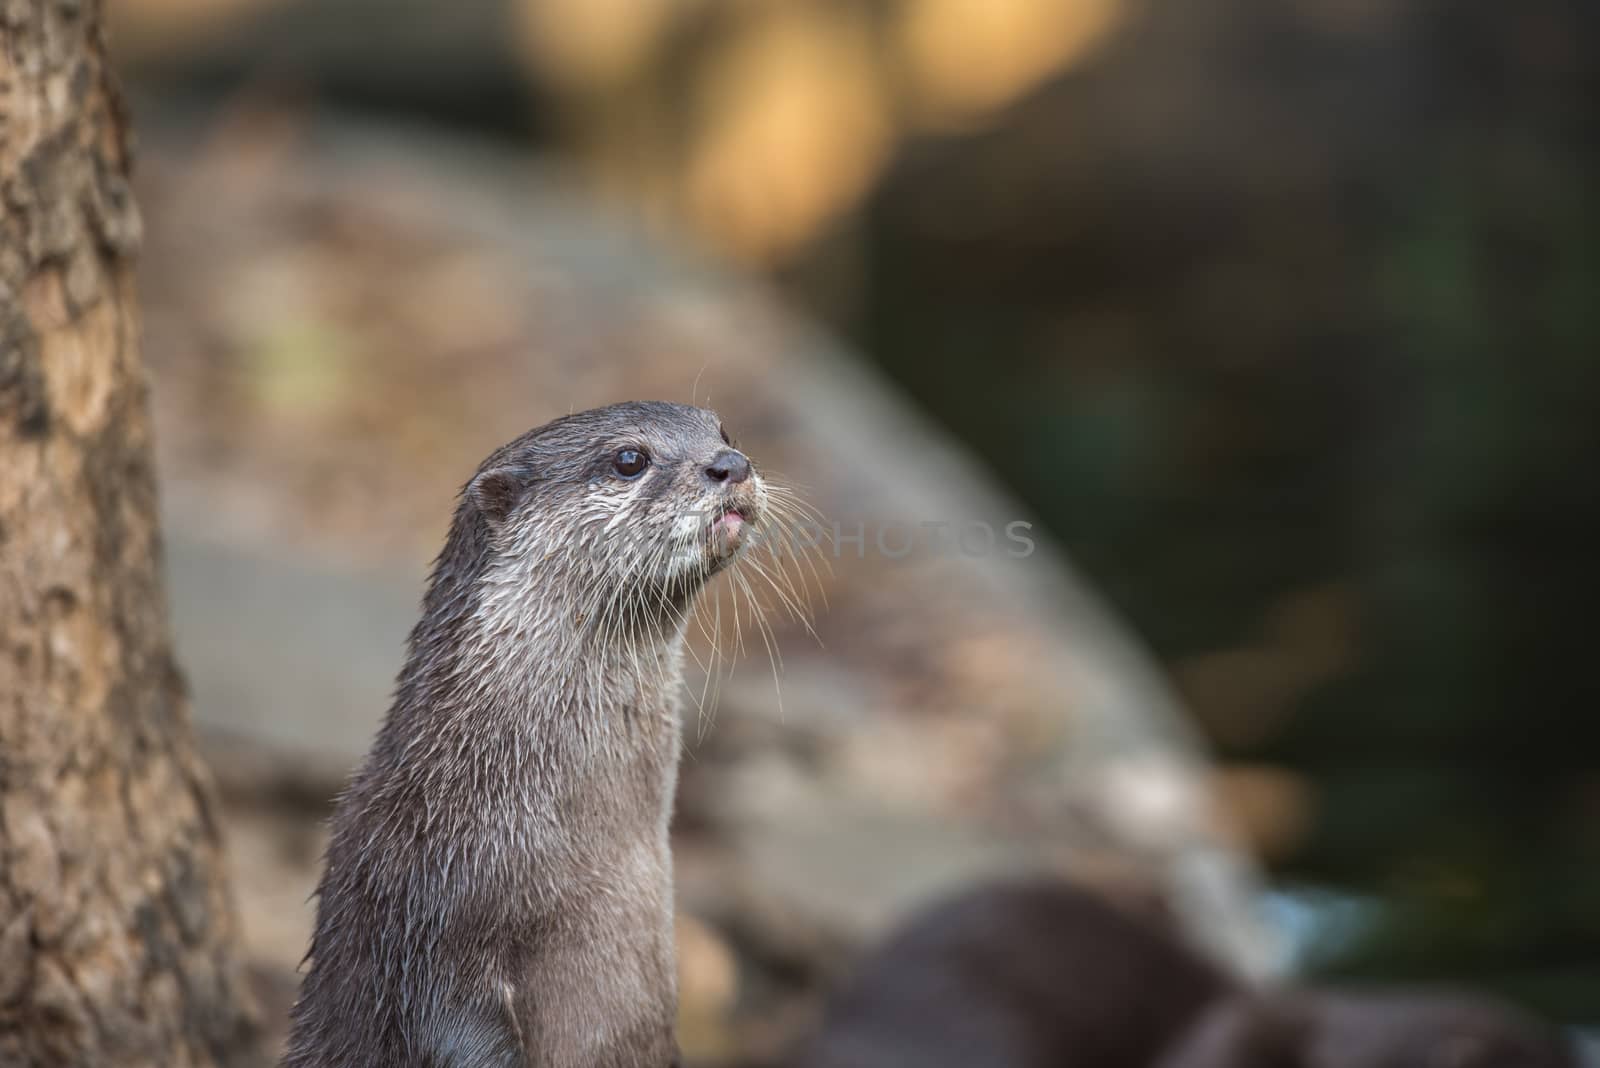 Asian small-clawed otter by t0pkul3